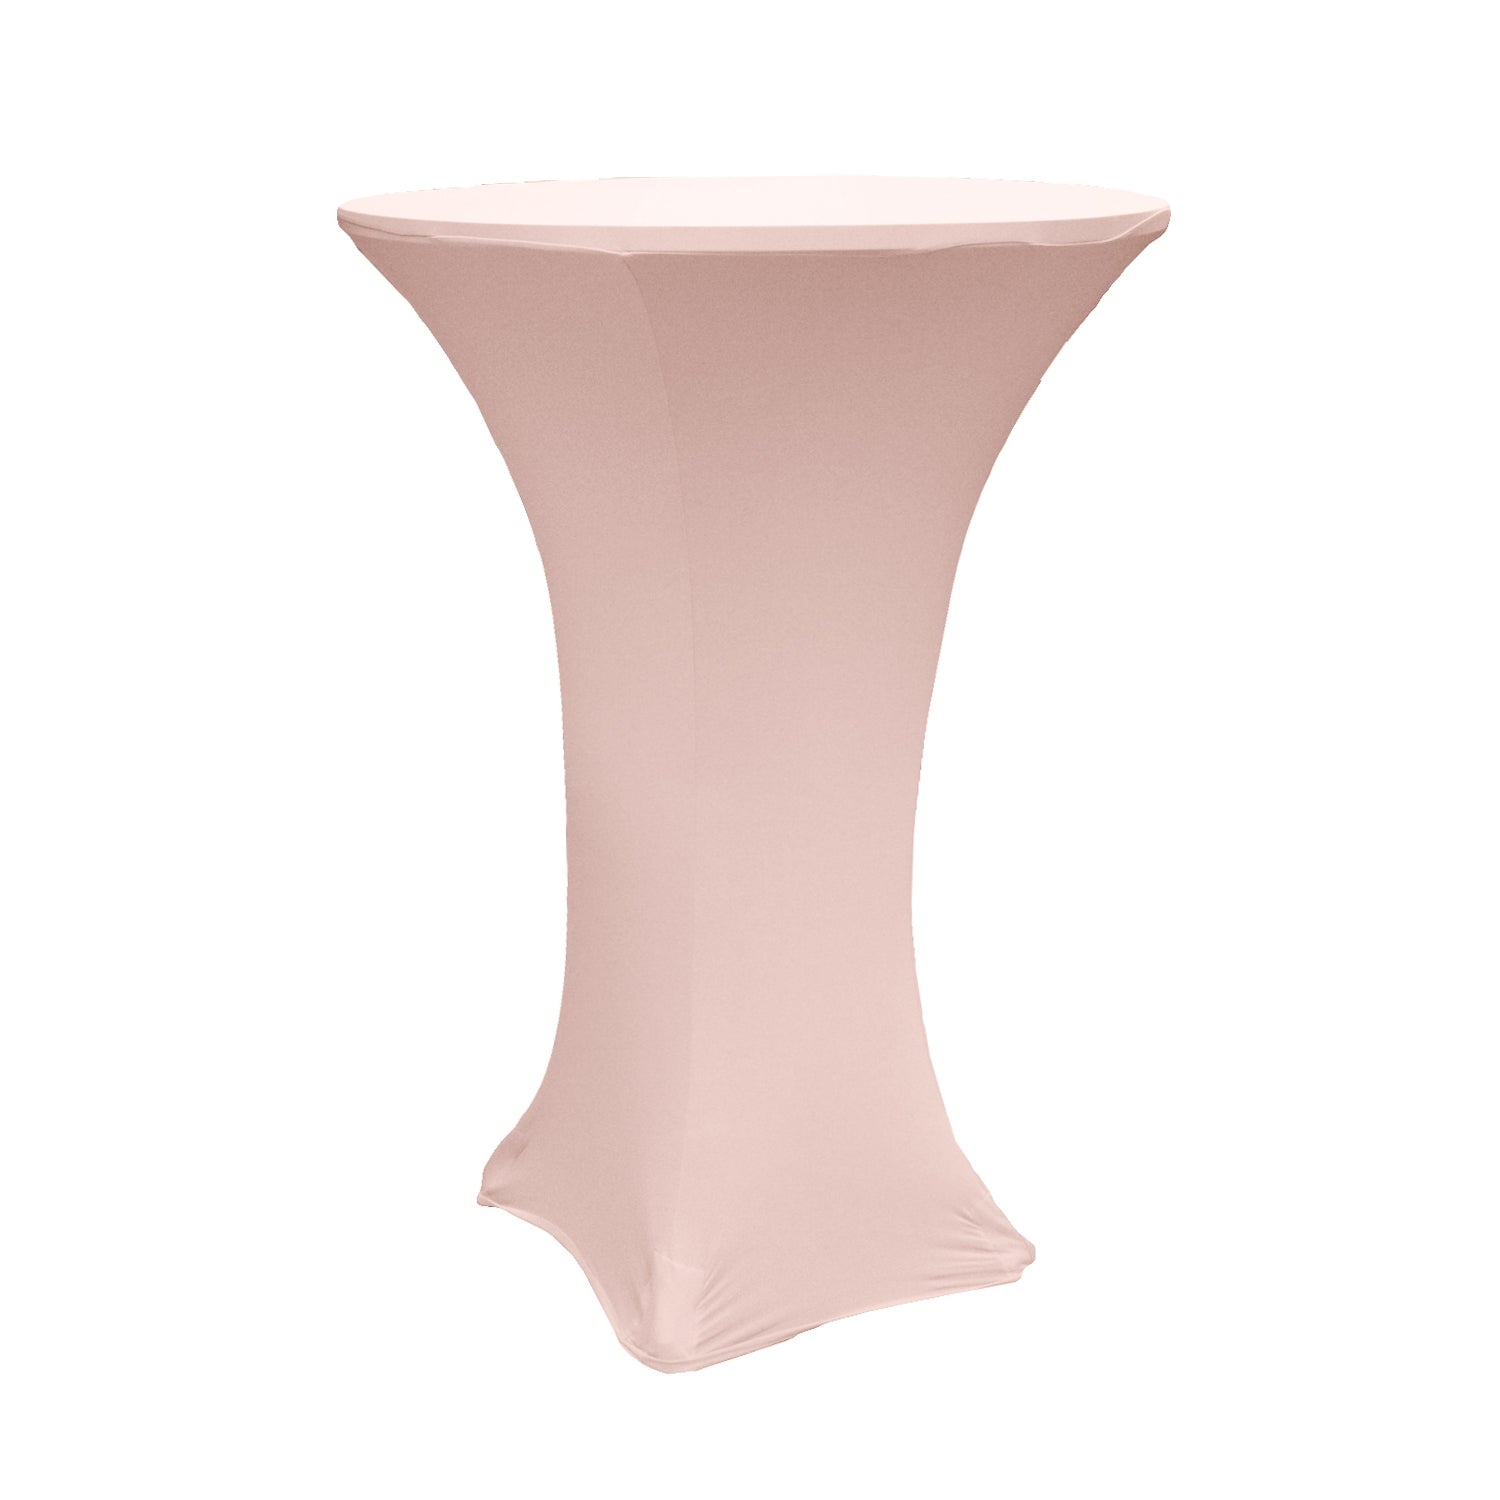 Spandex Cocktail Table Cover 36" Round - Blush/Rose Gold - CV Linens